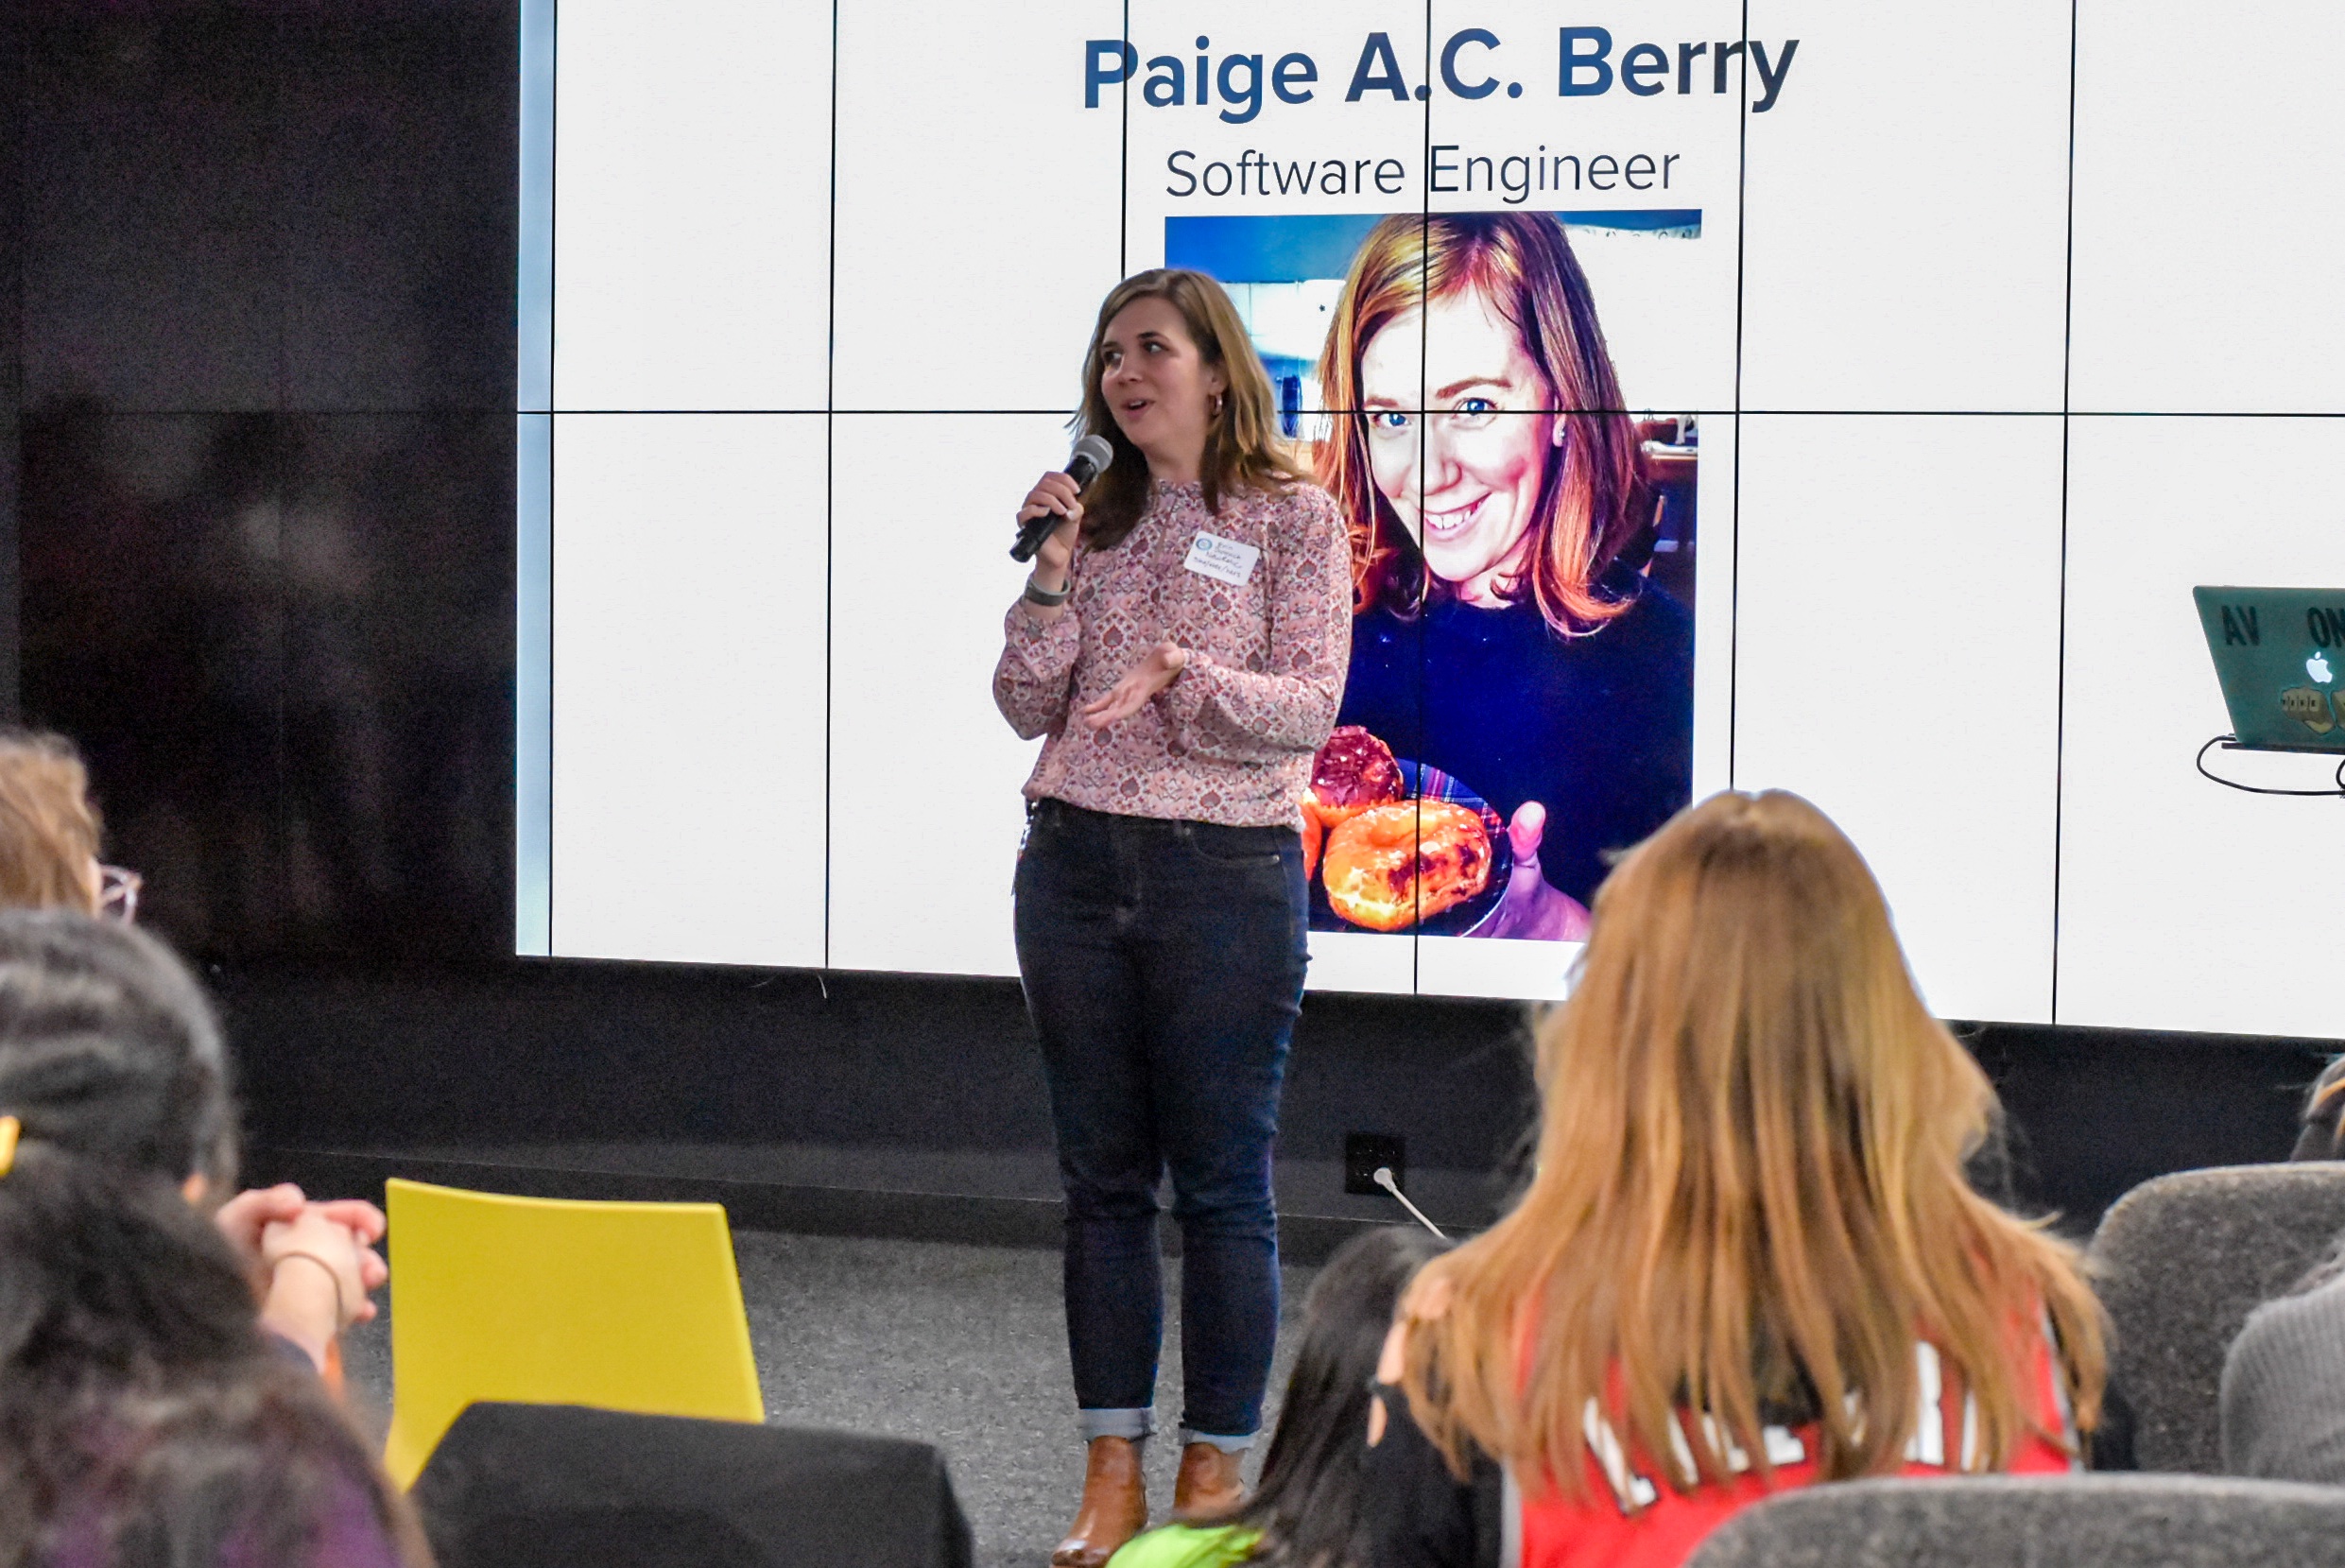 PDXWIT April Happy Hour @ New Relic, 4/16/19, Paige A.C. Berry - Software Engineer at New Relic - speaks